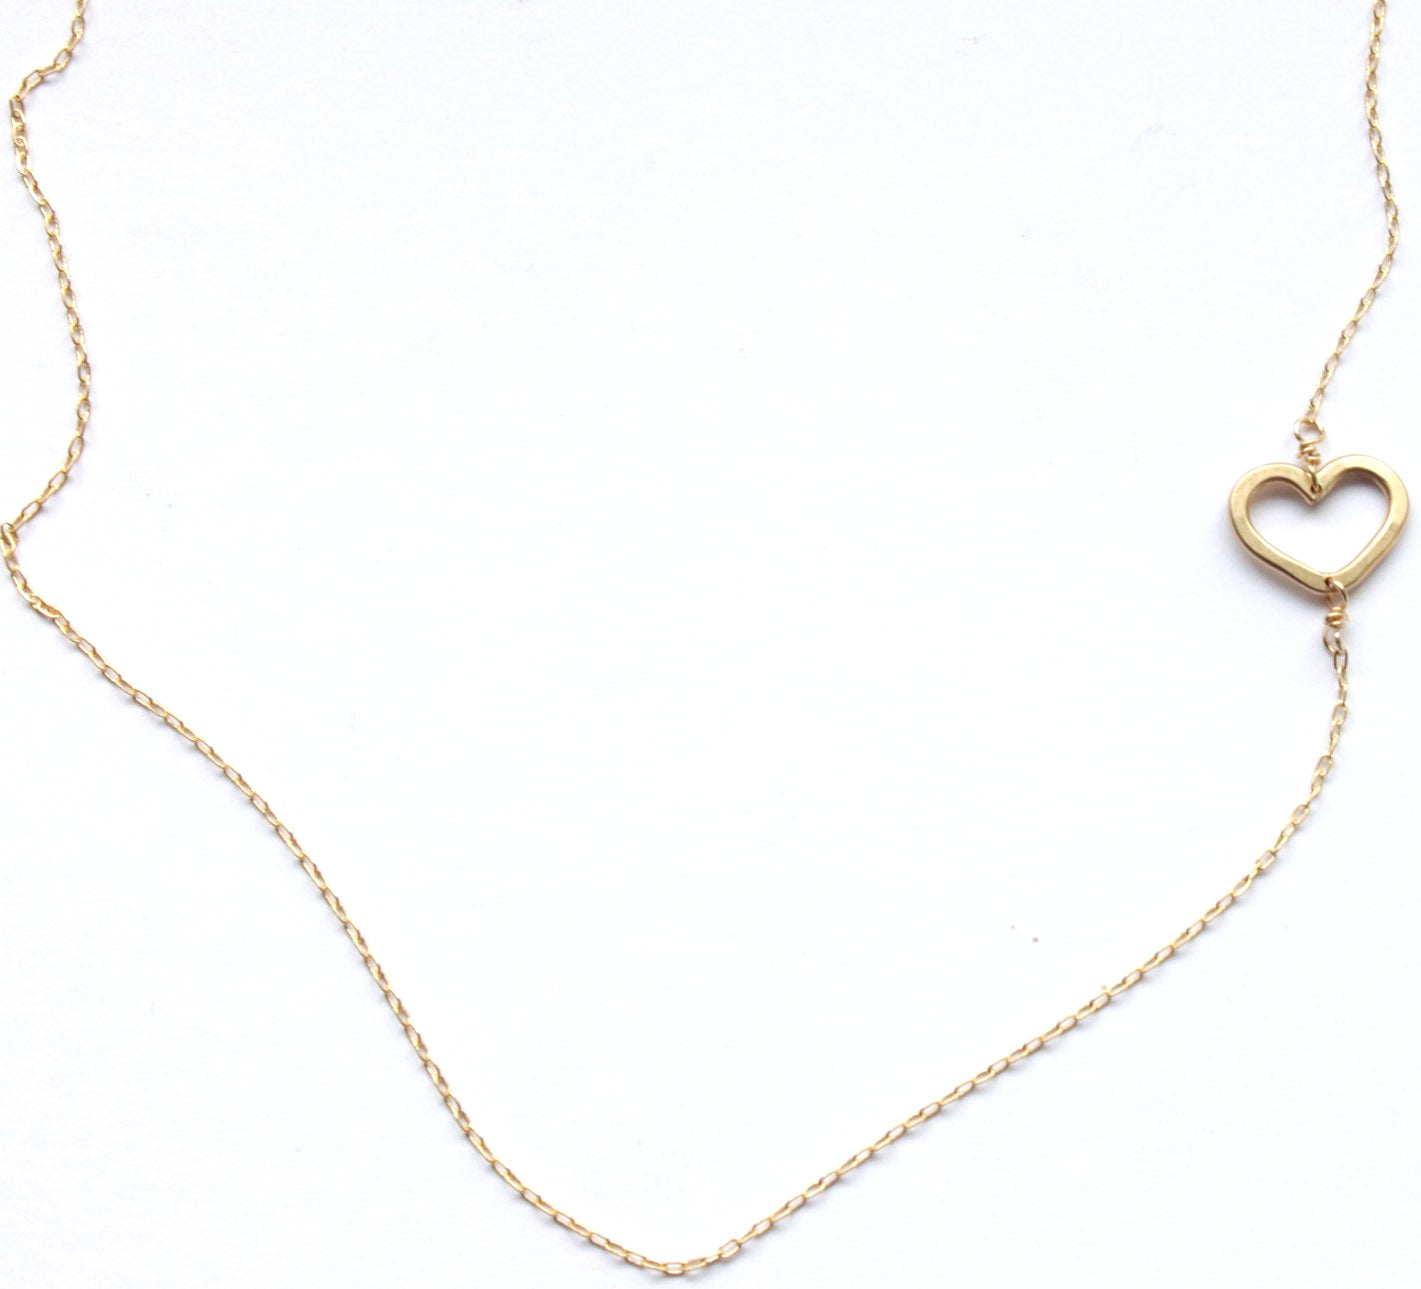 From My Heart necklace